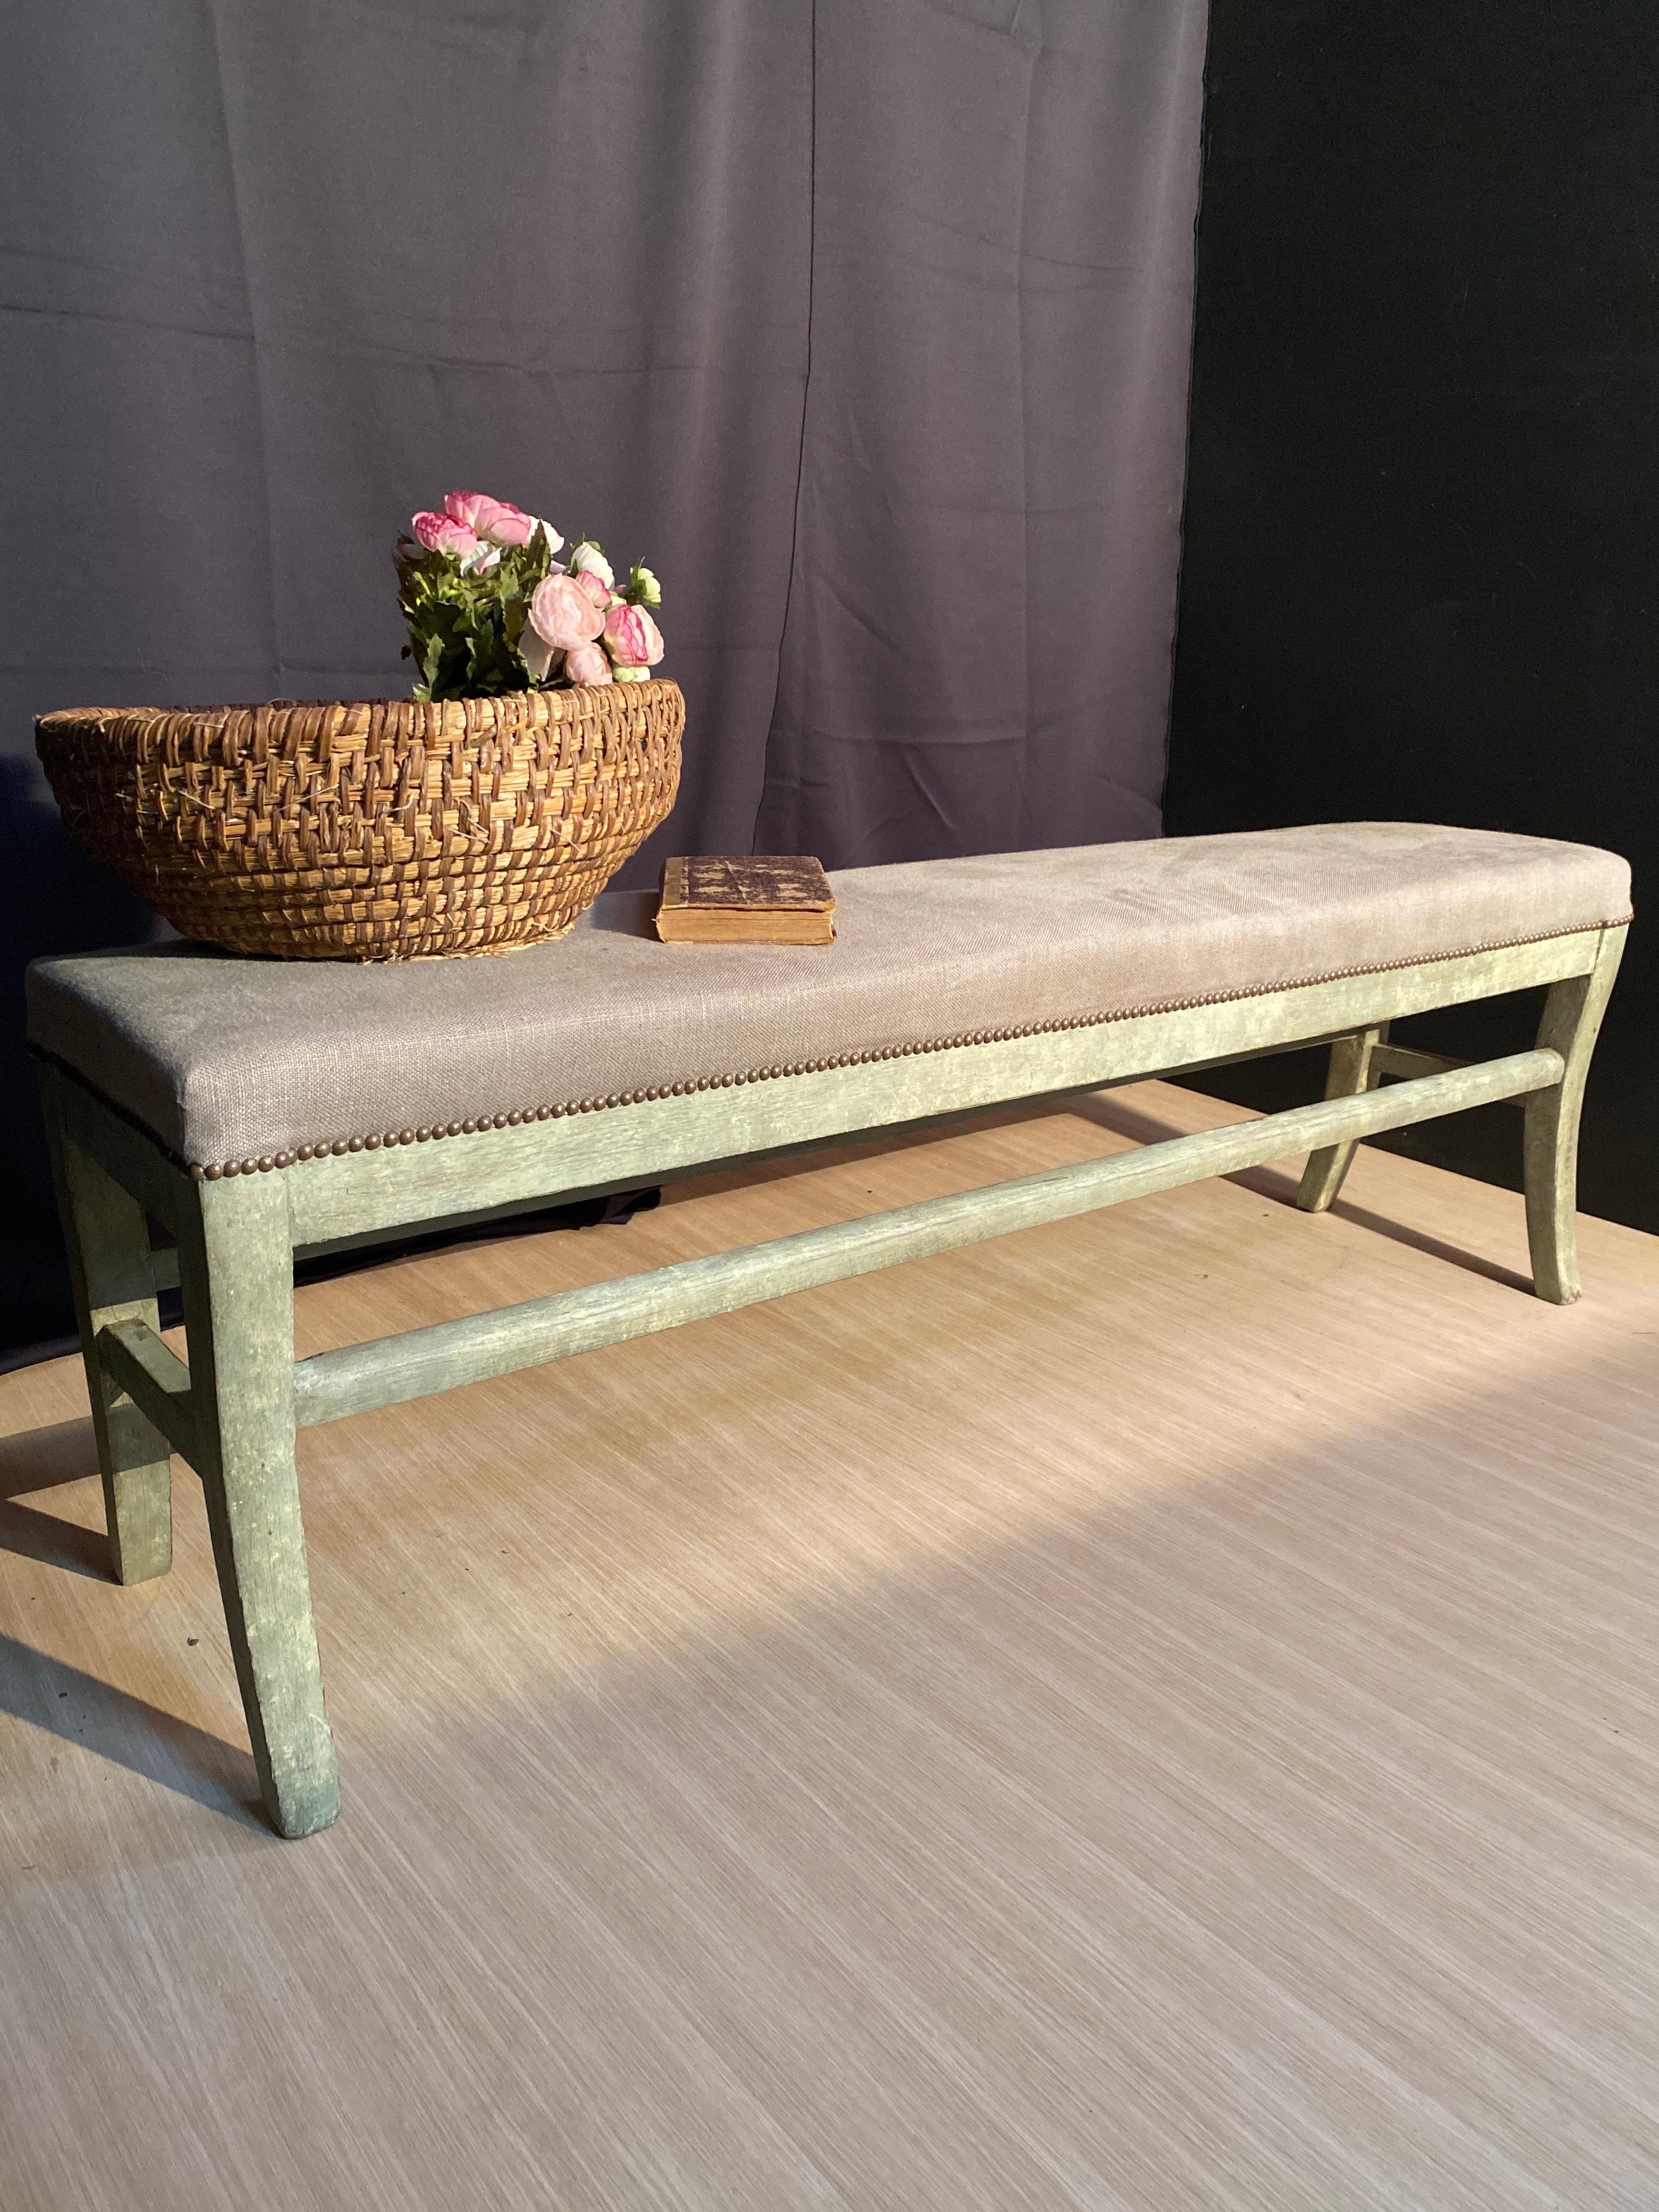 very pretty English patina bench dating from the 19th century with tee filling in good condition